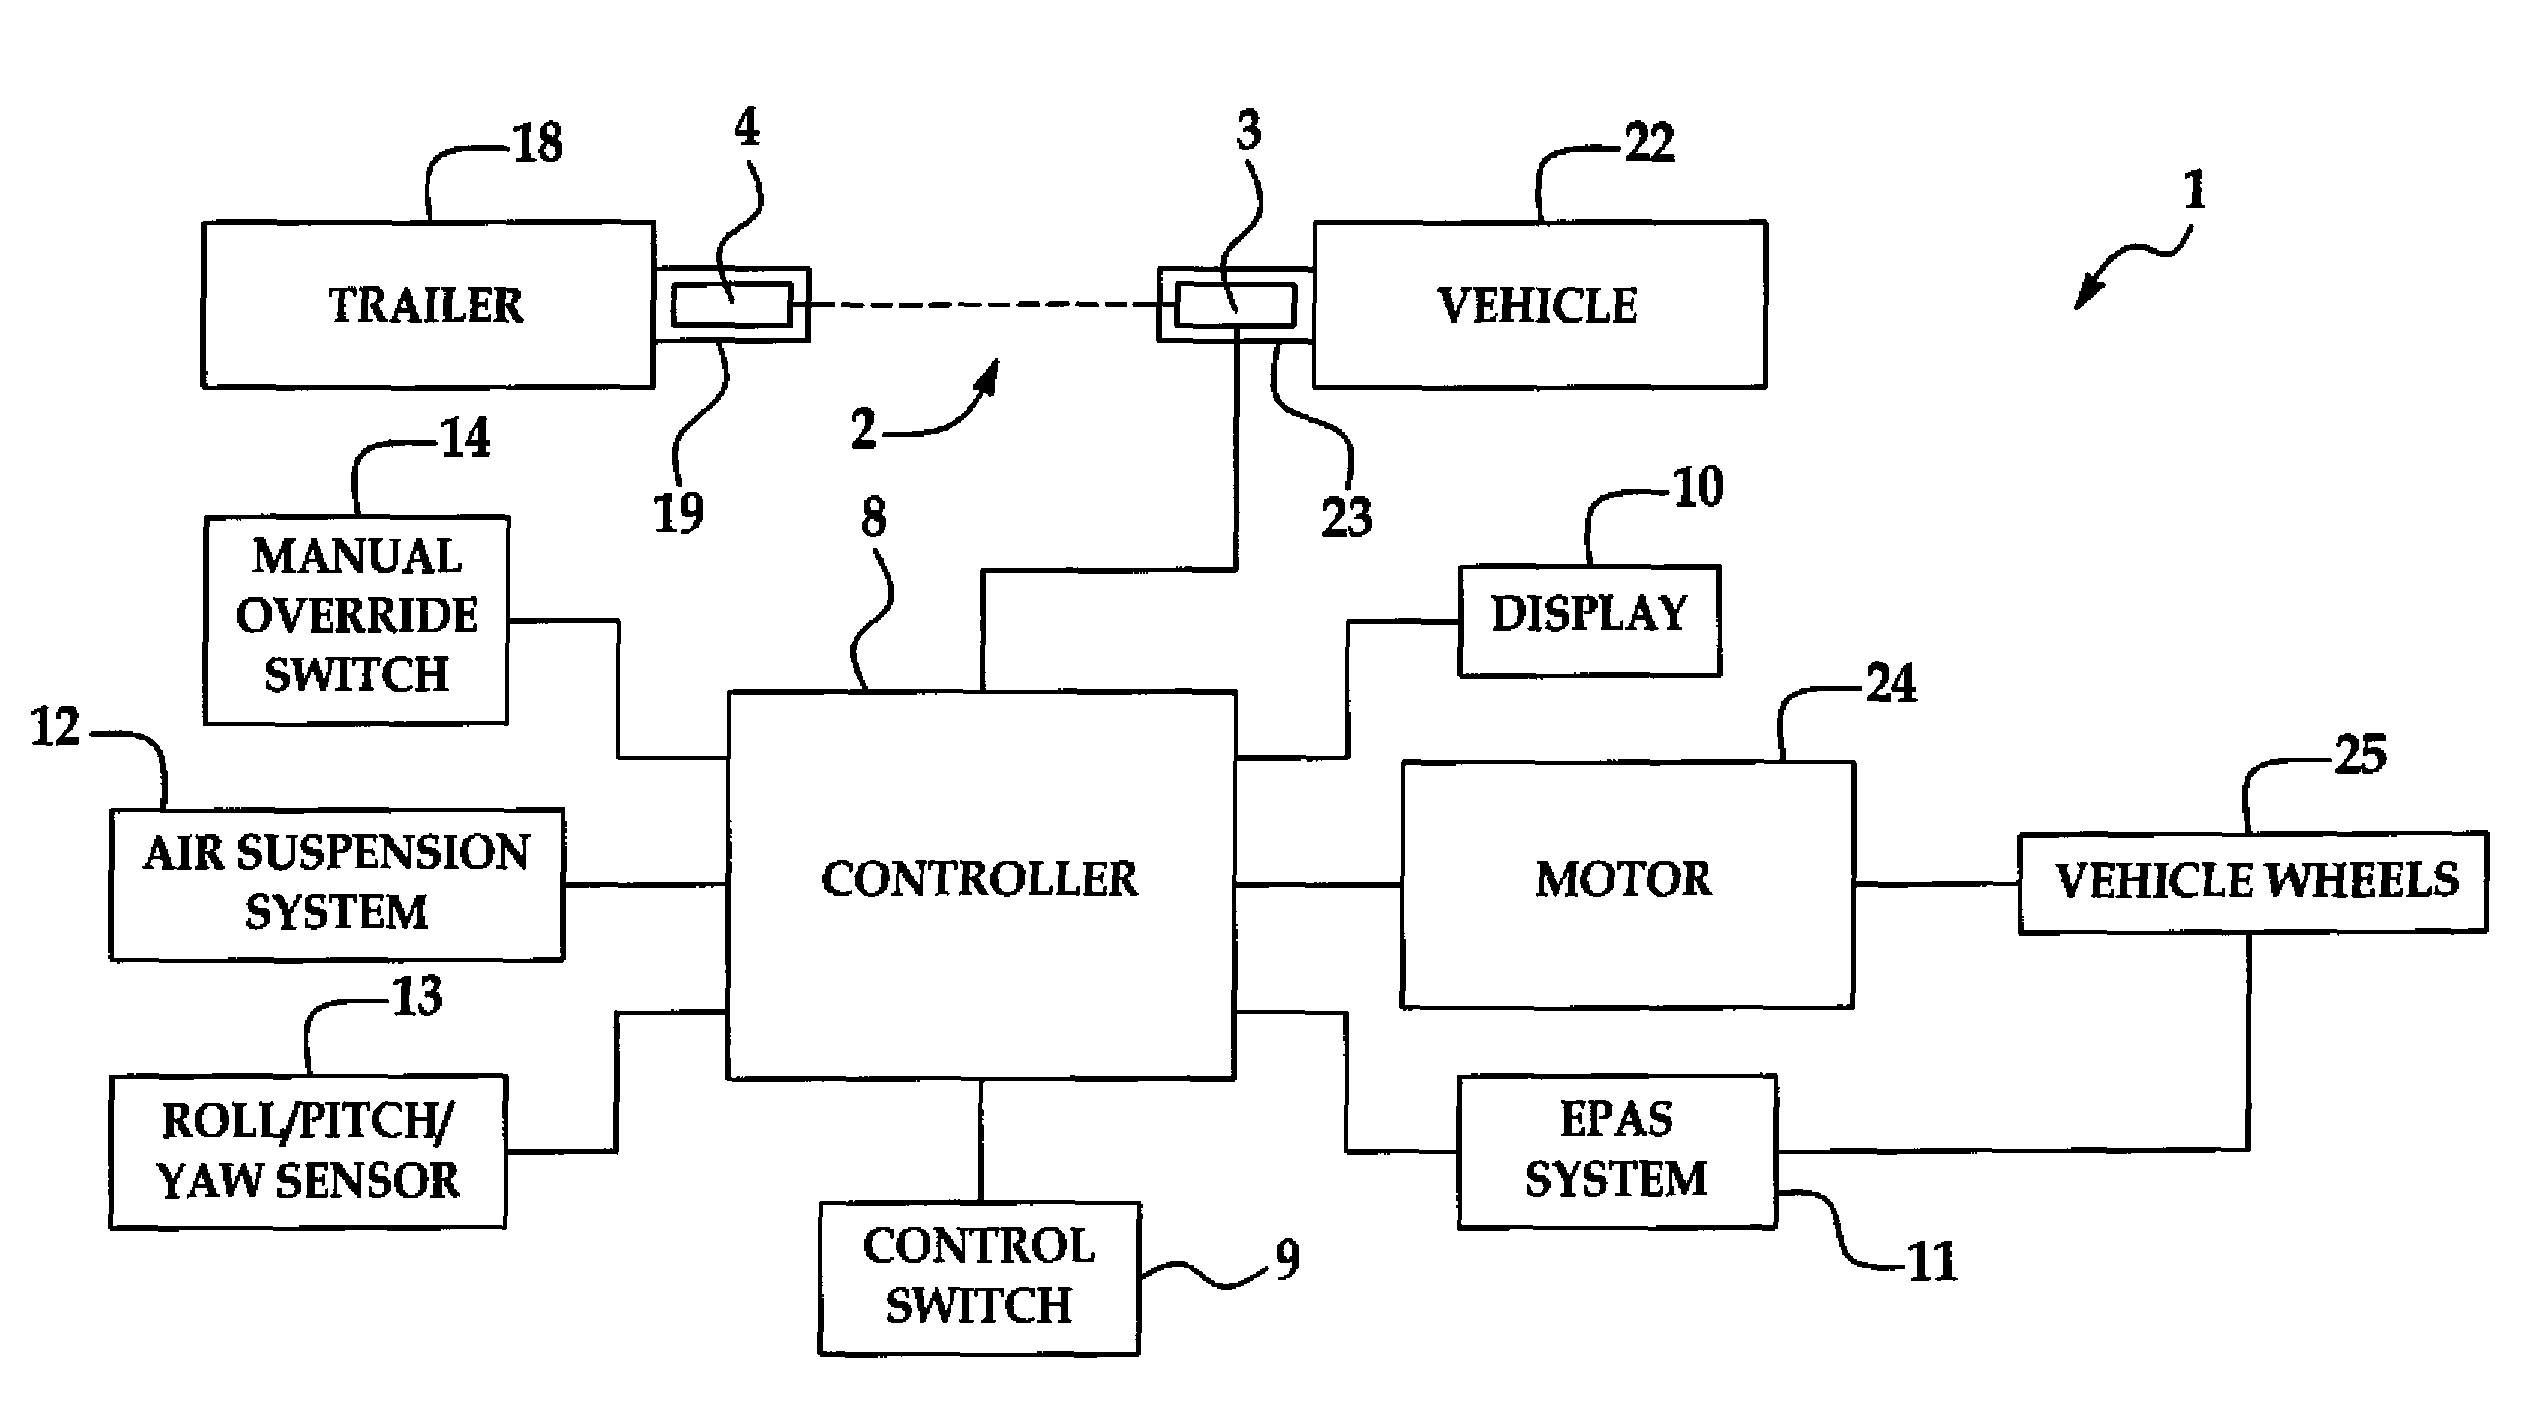 Trailer connection assist system